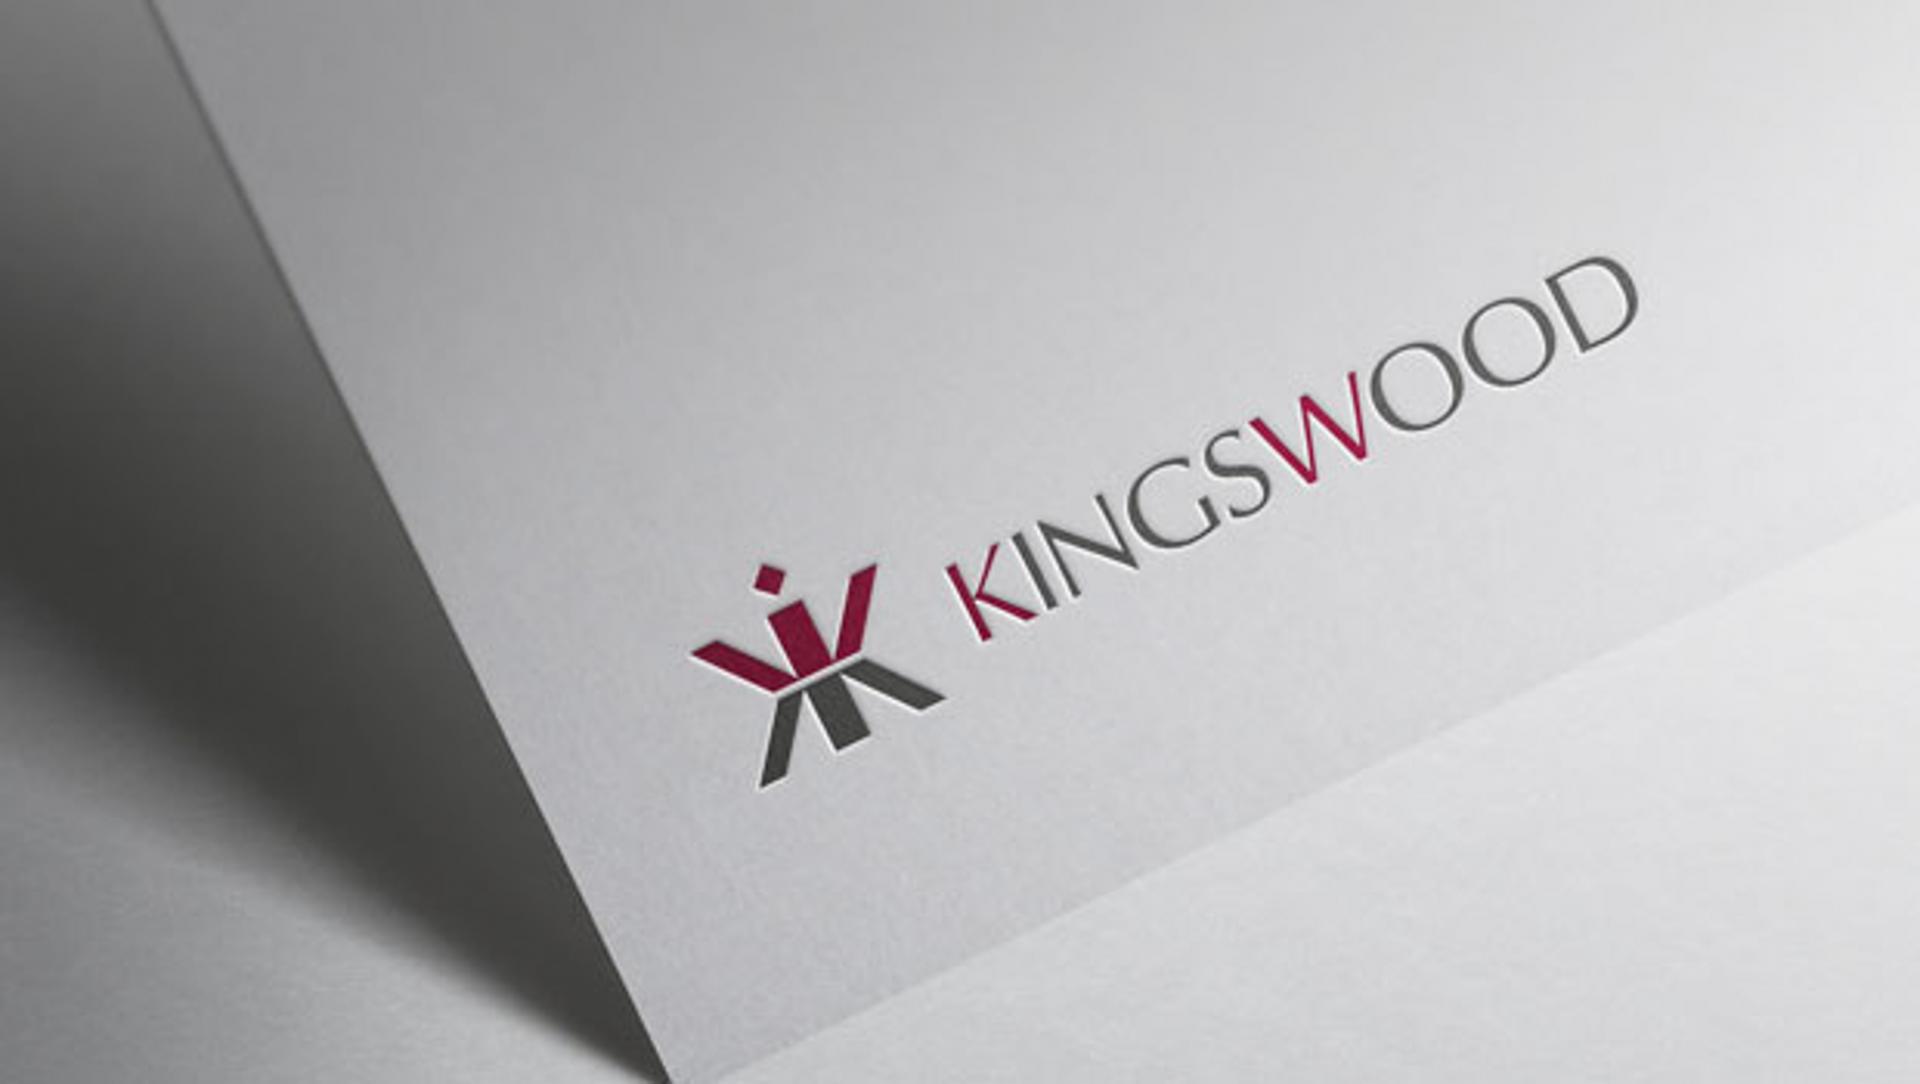 Kingswood continues acquisitive growth with £12.4m deal